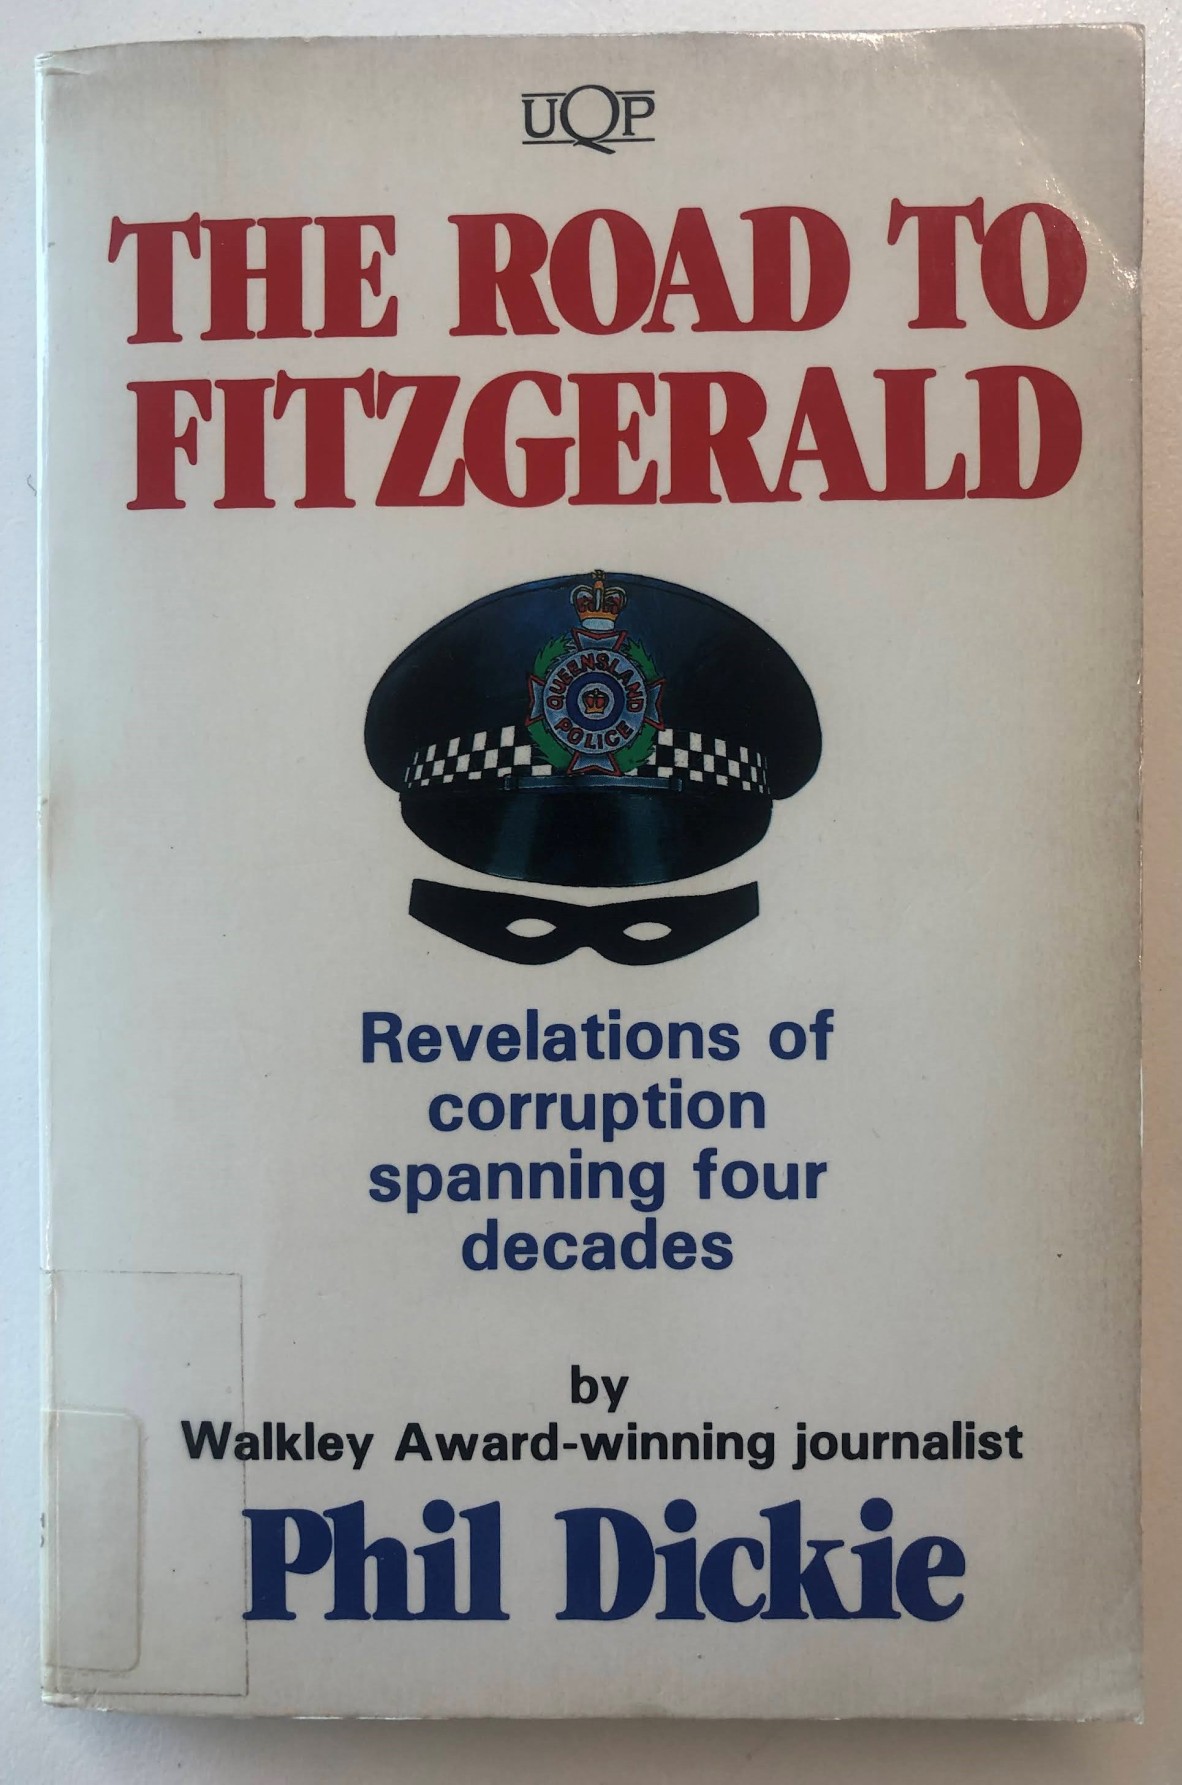 The Road to Fitzgerald by Phil Dickie